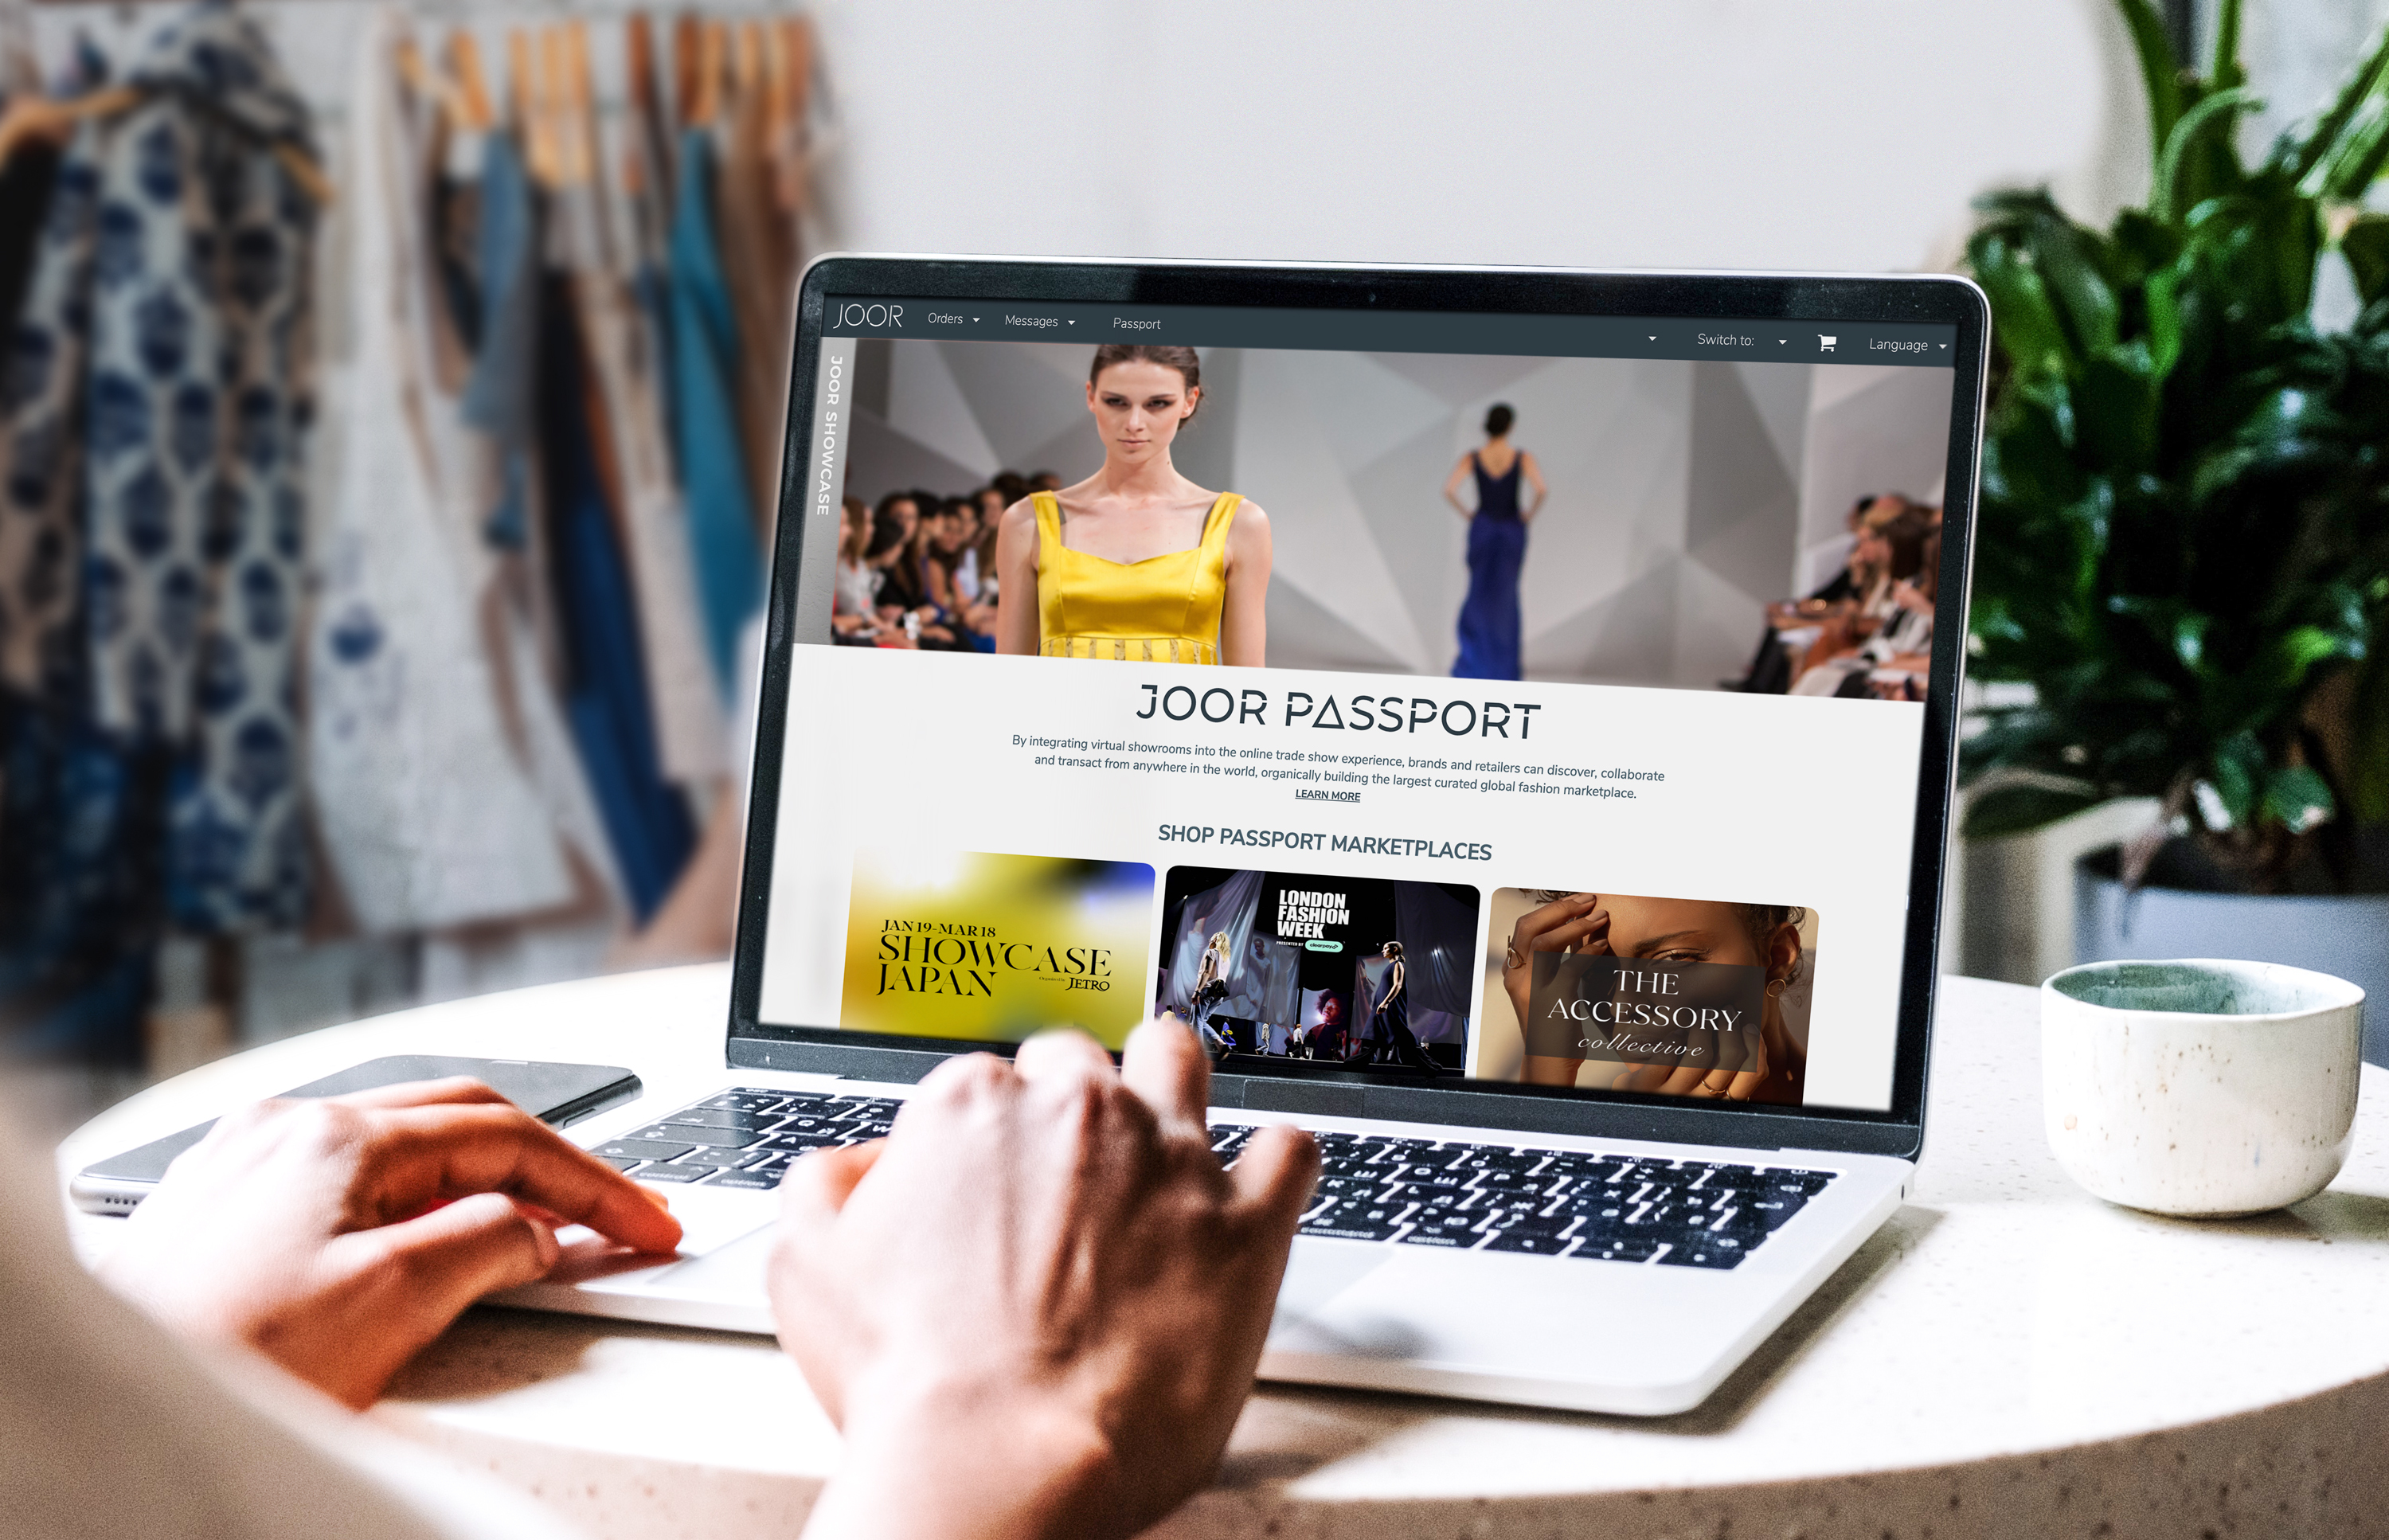 JOOR Passport is an advanced virtual platform that facilitates the digitalization of international tradeshows and fashion events, allowing brands and retailers to discover, collaborate, and transact from anywhere in the world.